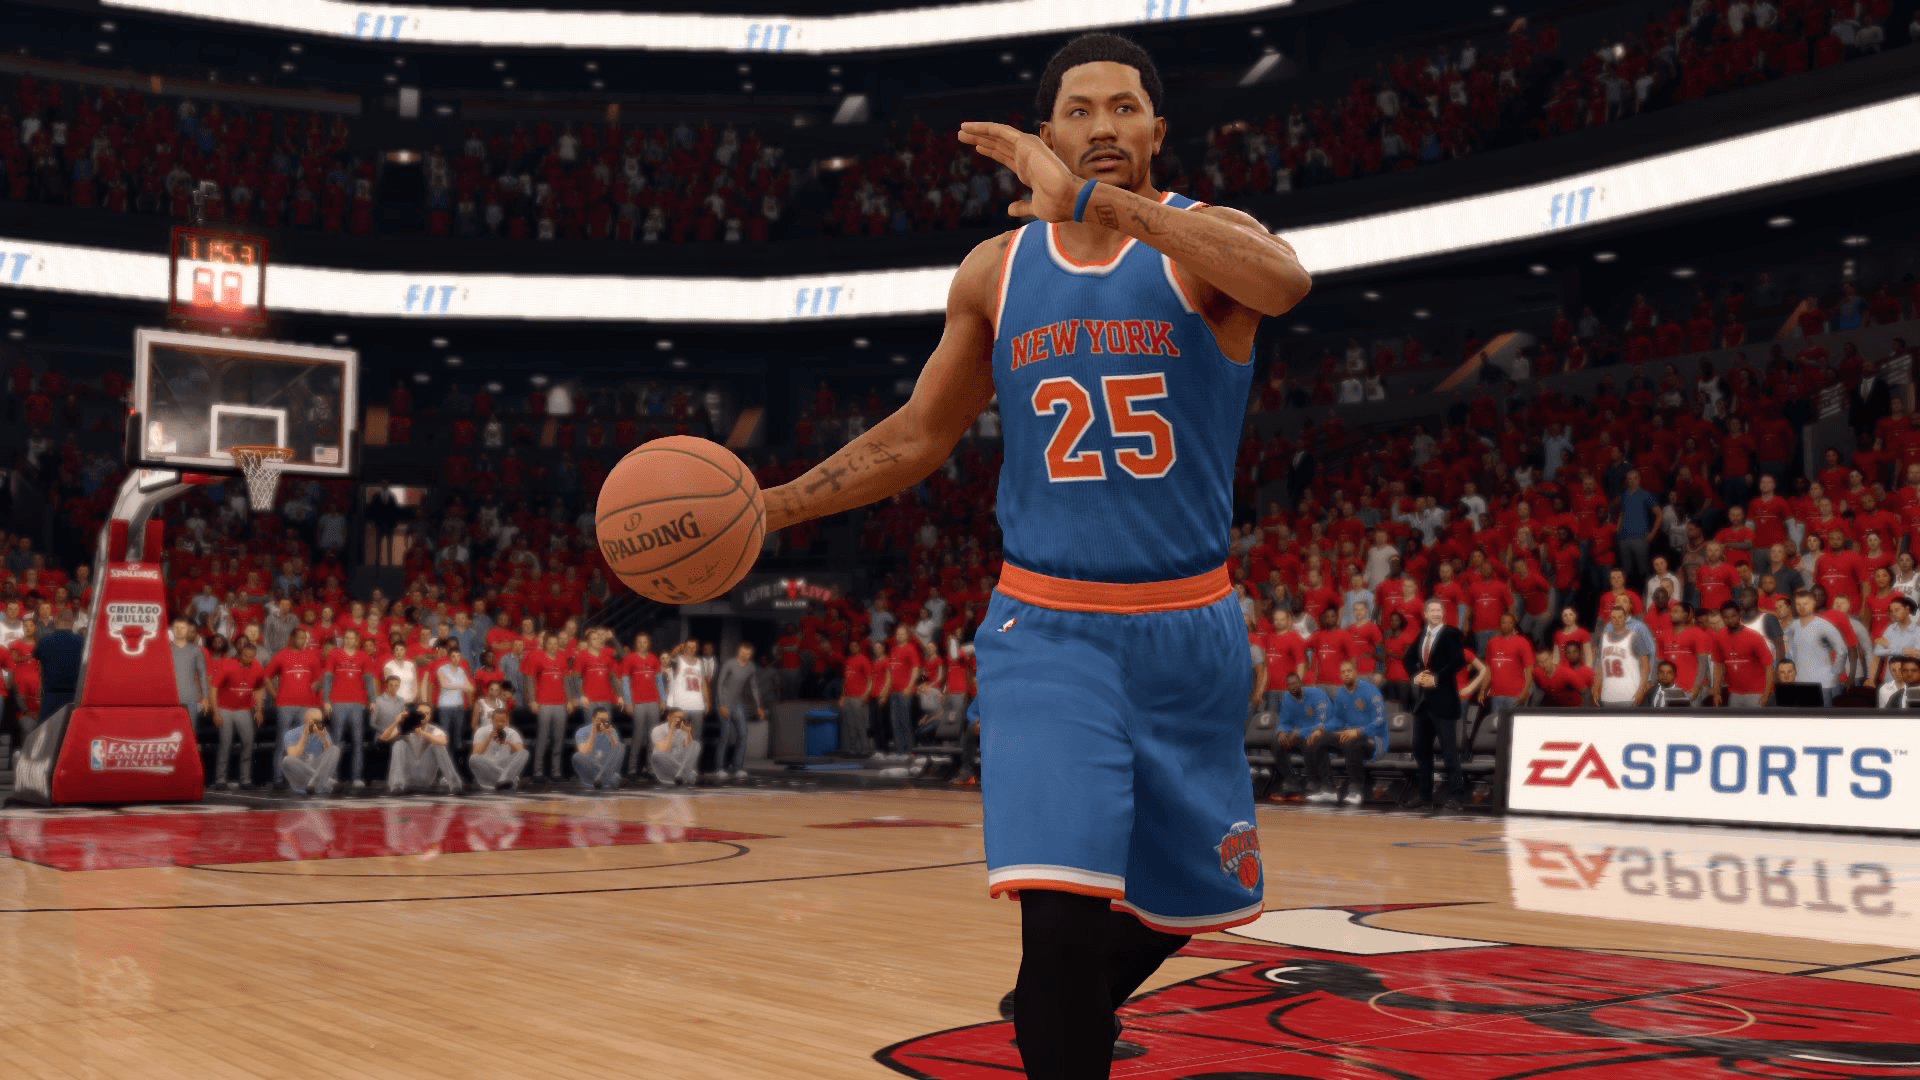 Monday Tip Off: Should NBA Live 18 Be More Traditional?